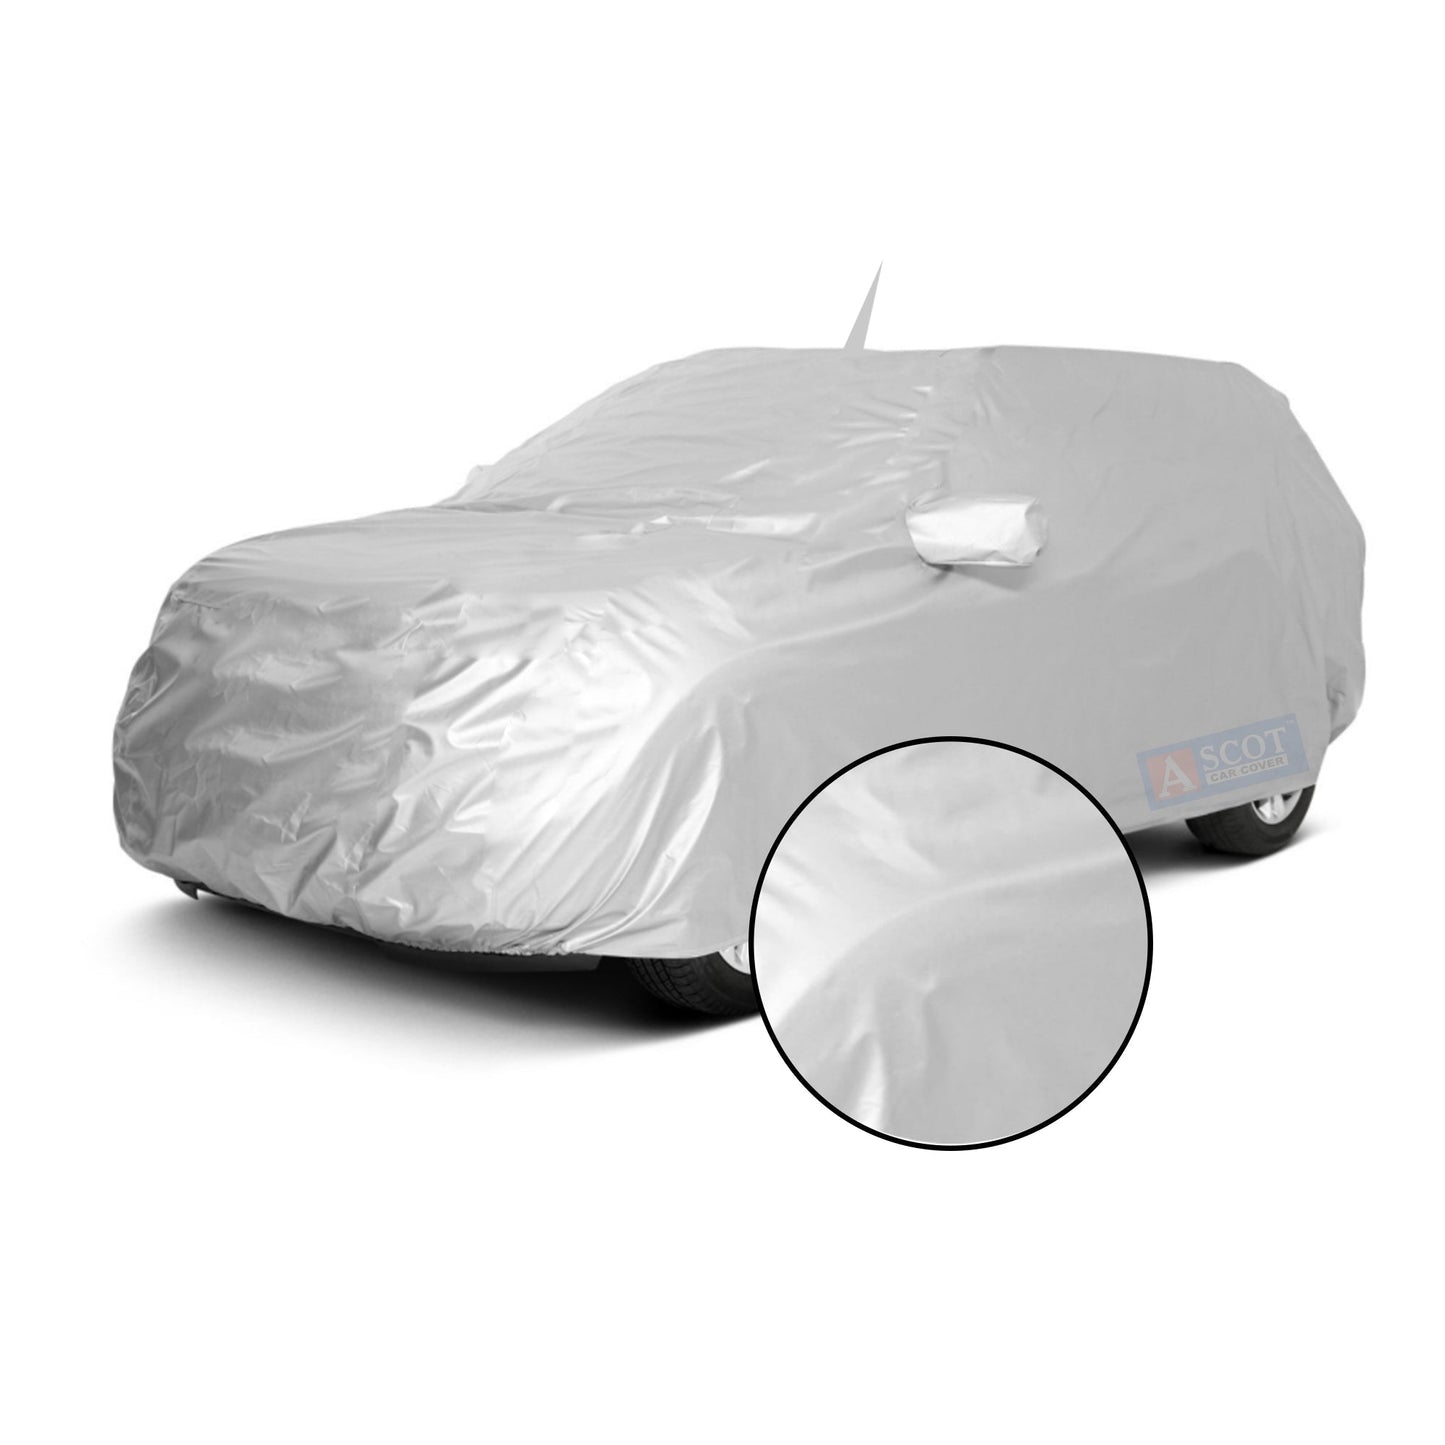 Ascot Toyota Corolla Altis 2008-2014 Model Car Body Cover Dust Proof, Trippel Stitched